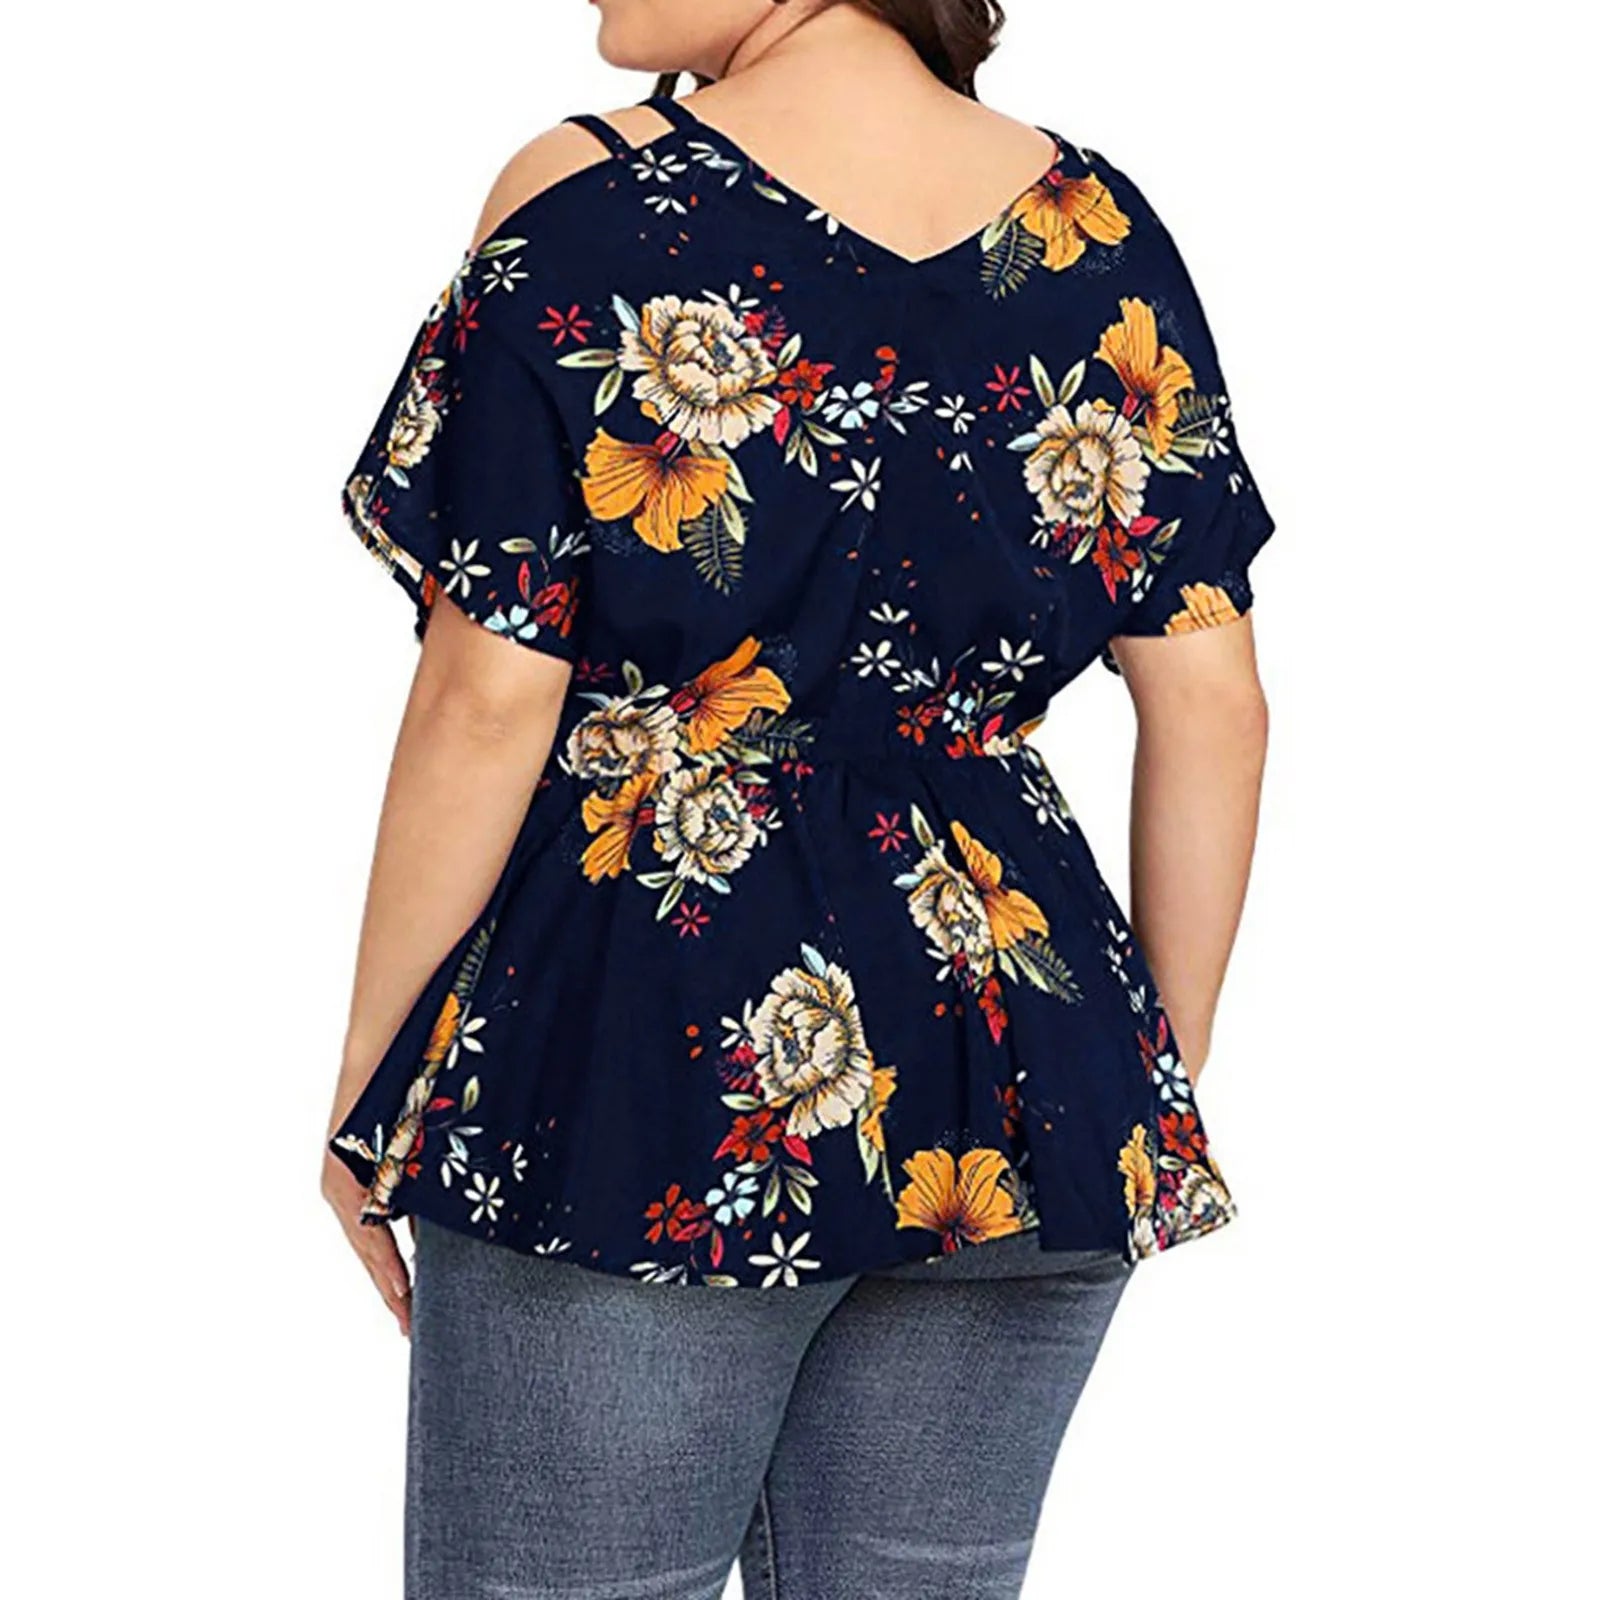 Women Floral Print Tops And Blouses Sexy Off Shoulder Tunic Shirt